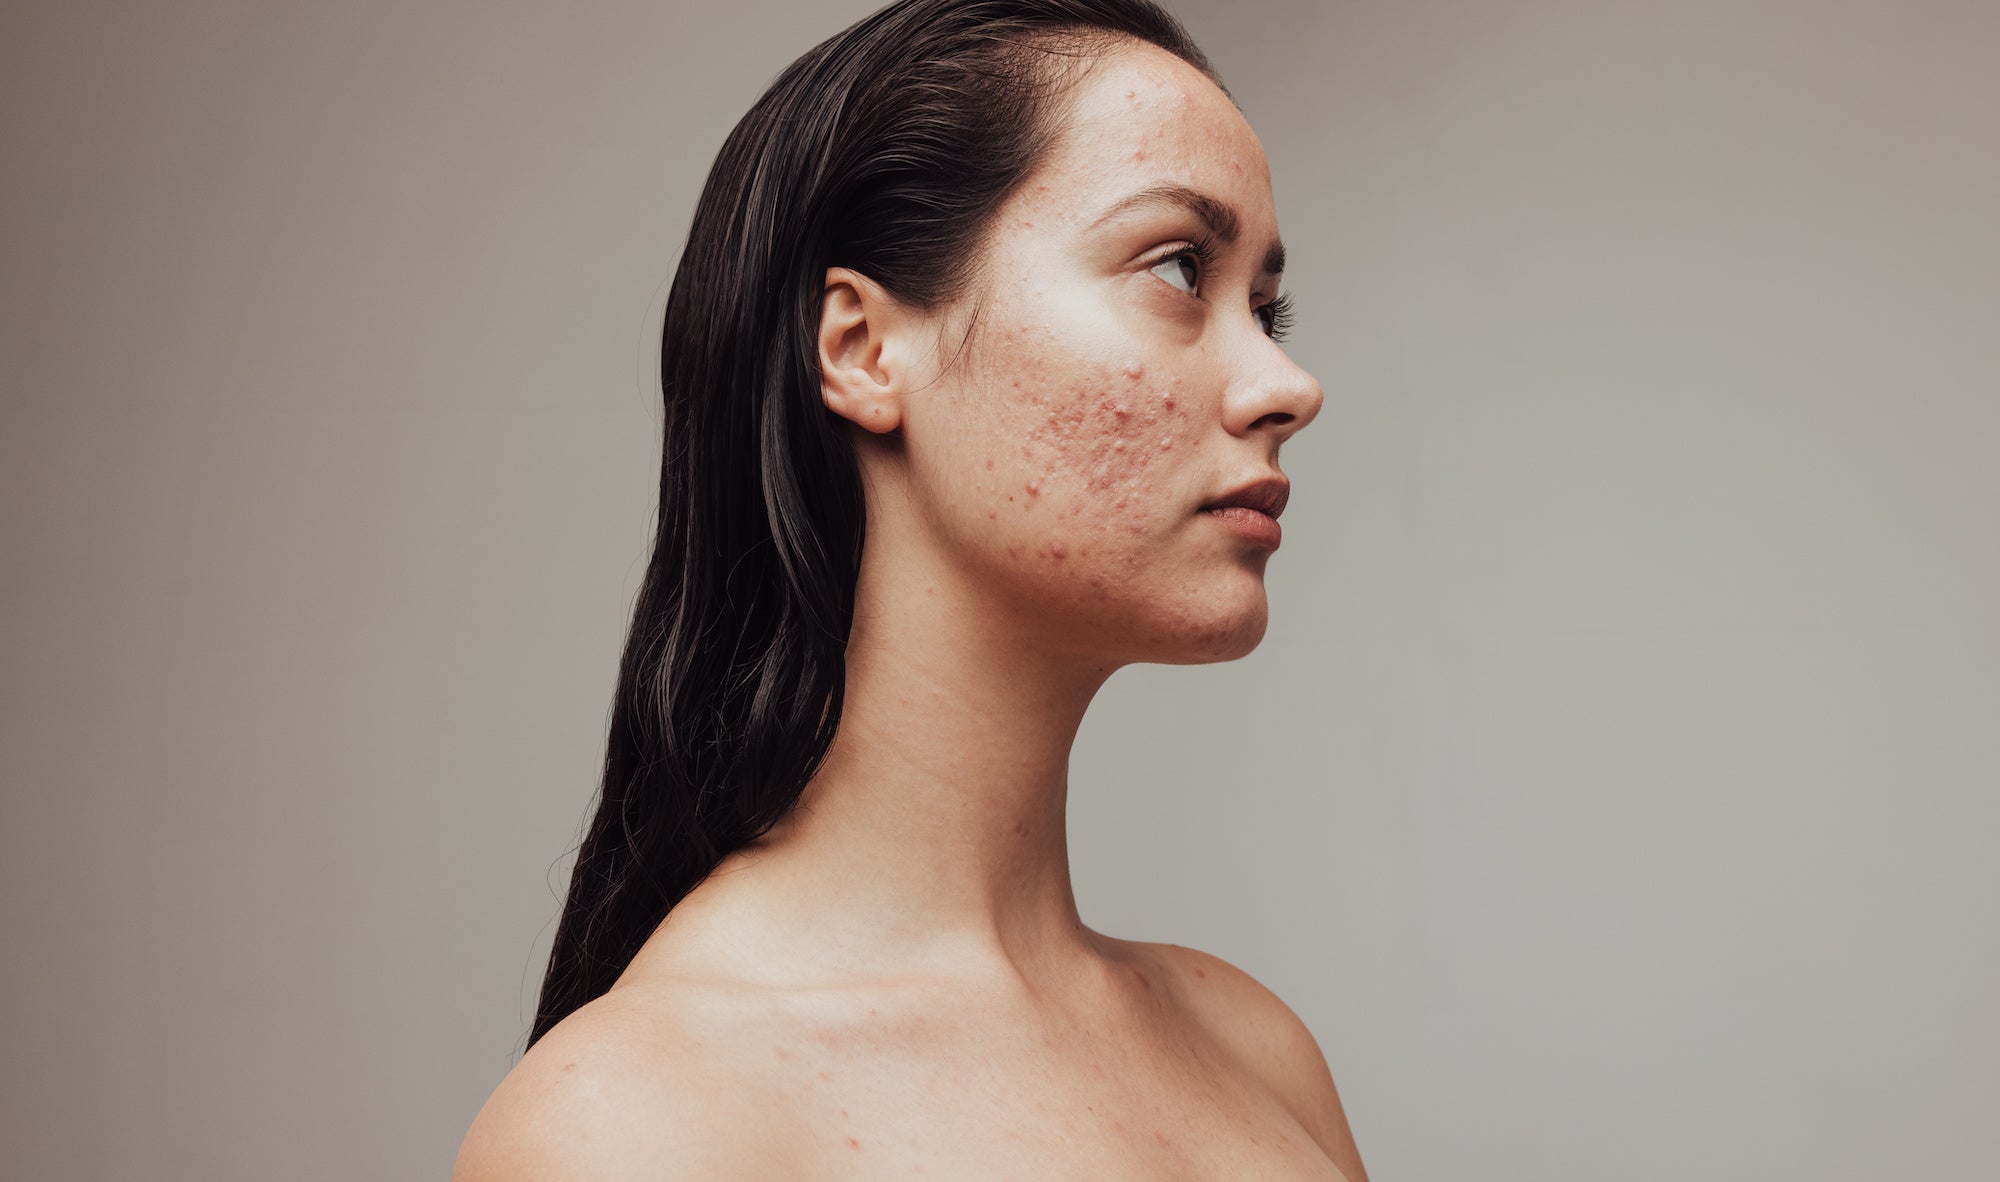 5 Things You Didn't Know About Acne